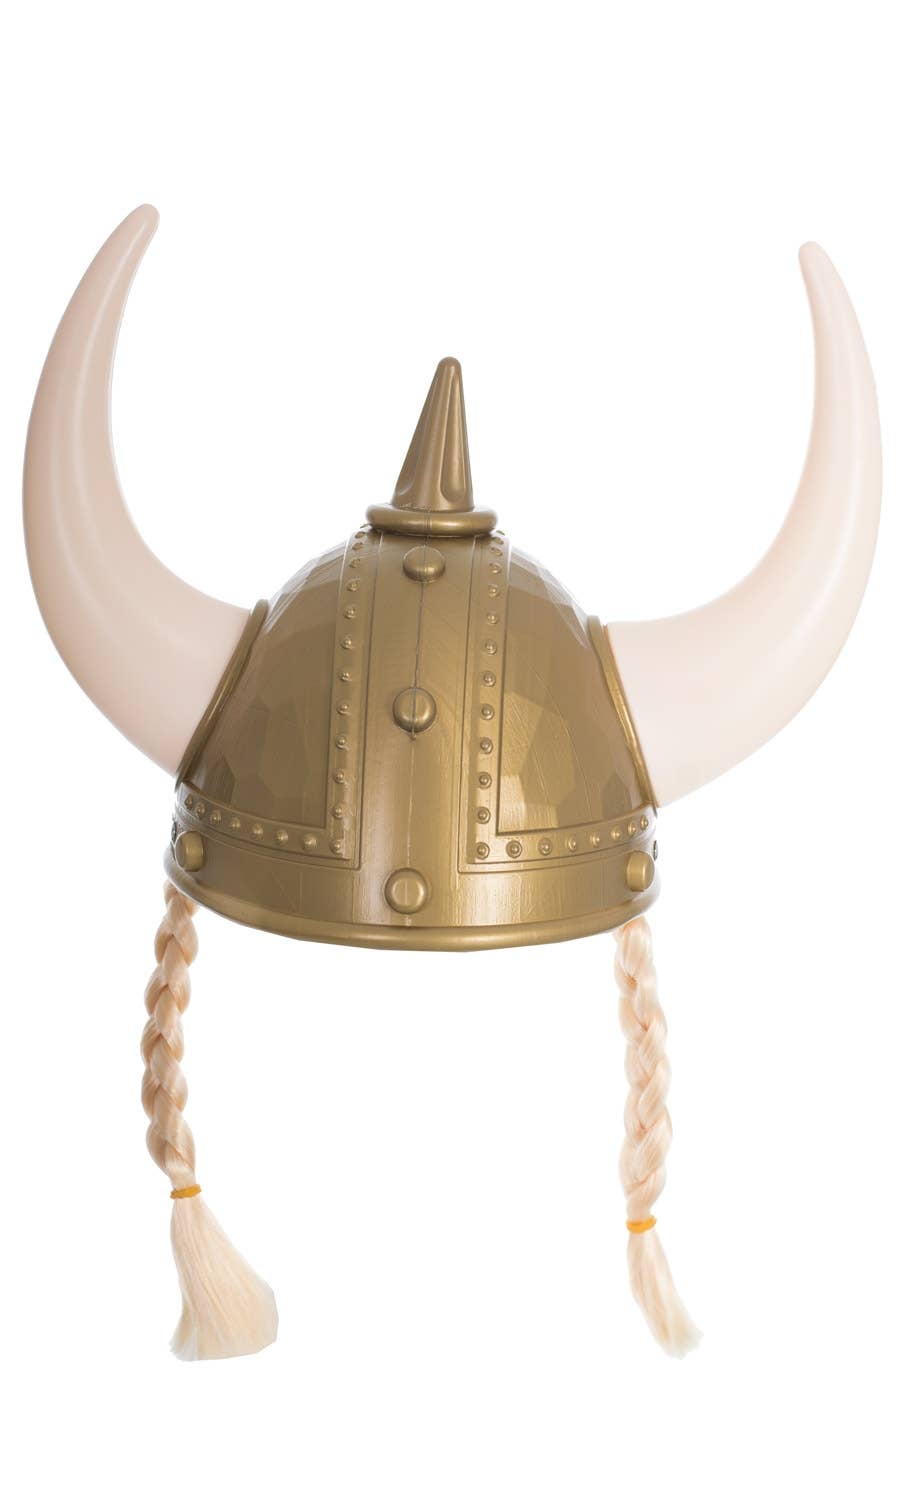 Gold Viking Warrior Costume Helmet with Horns and Plaits